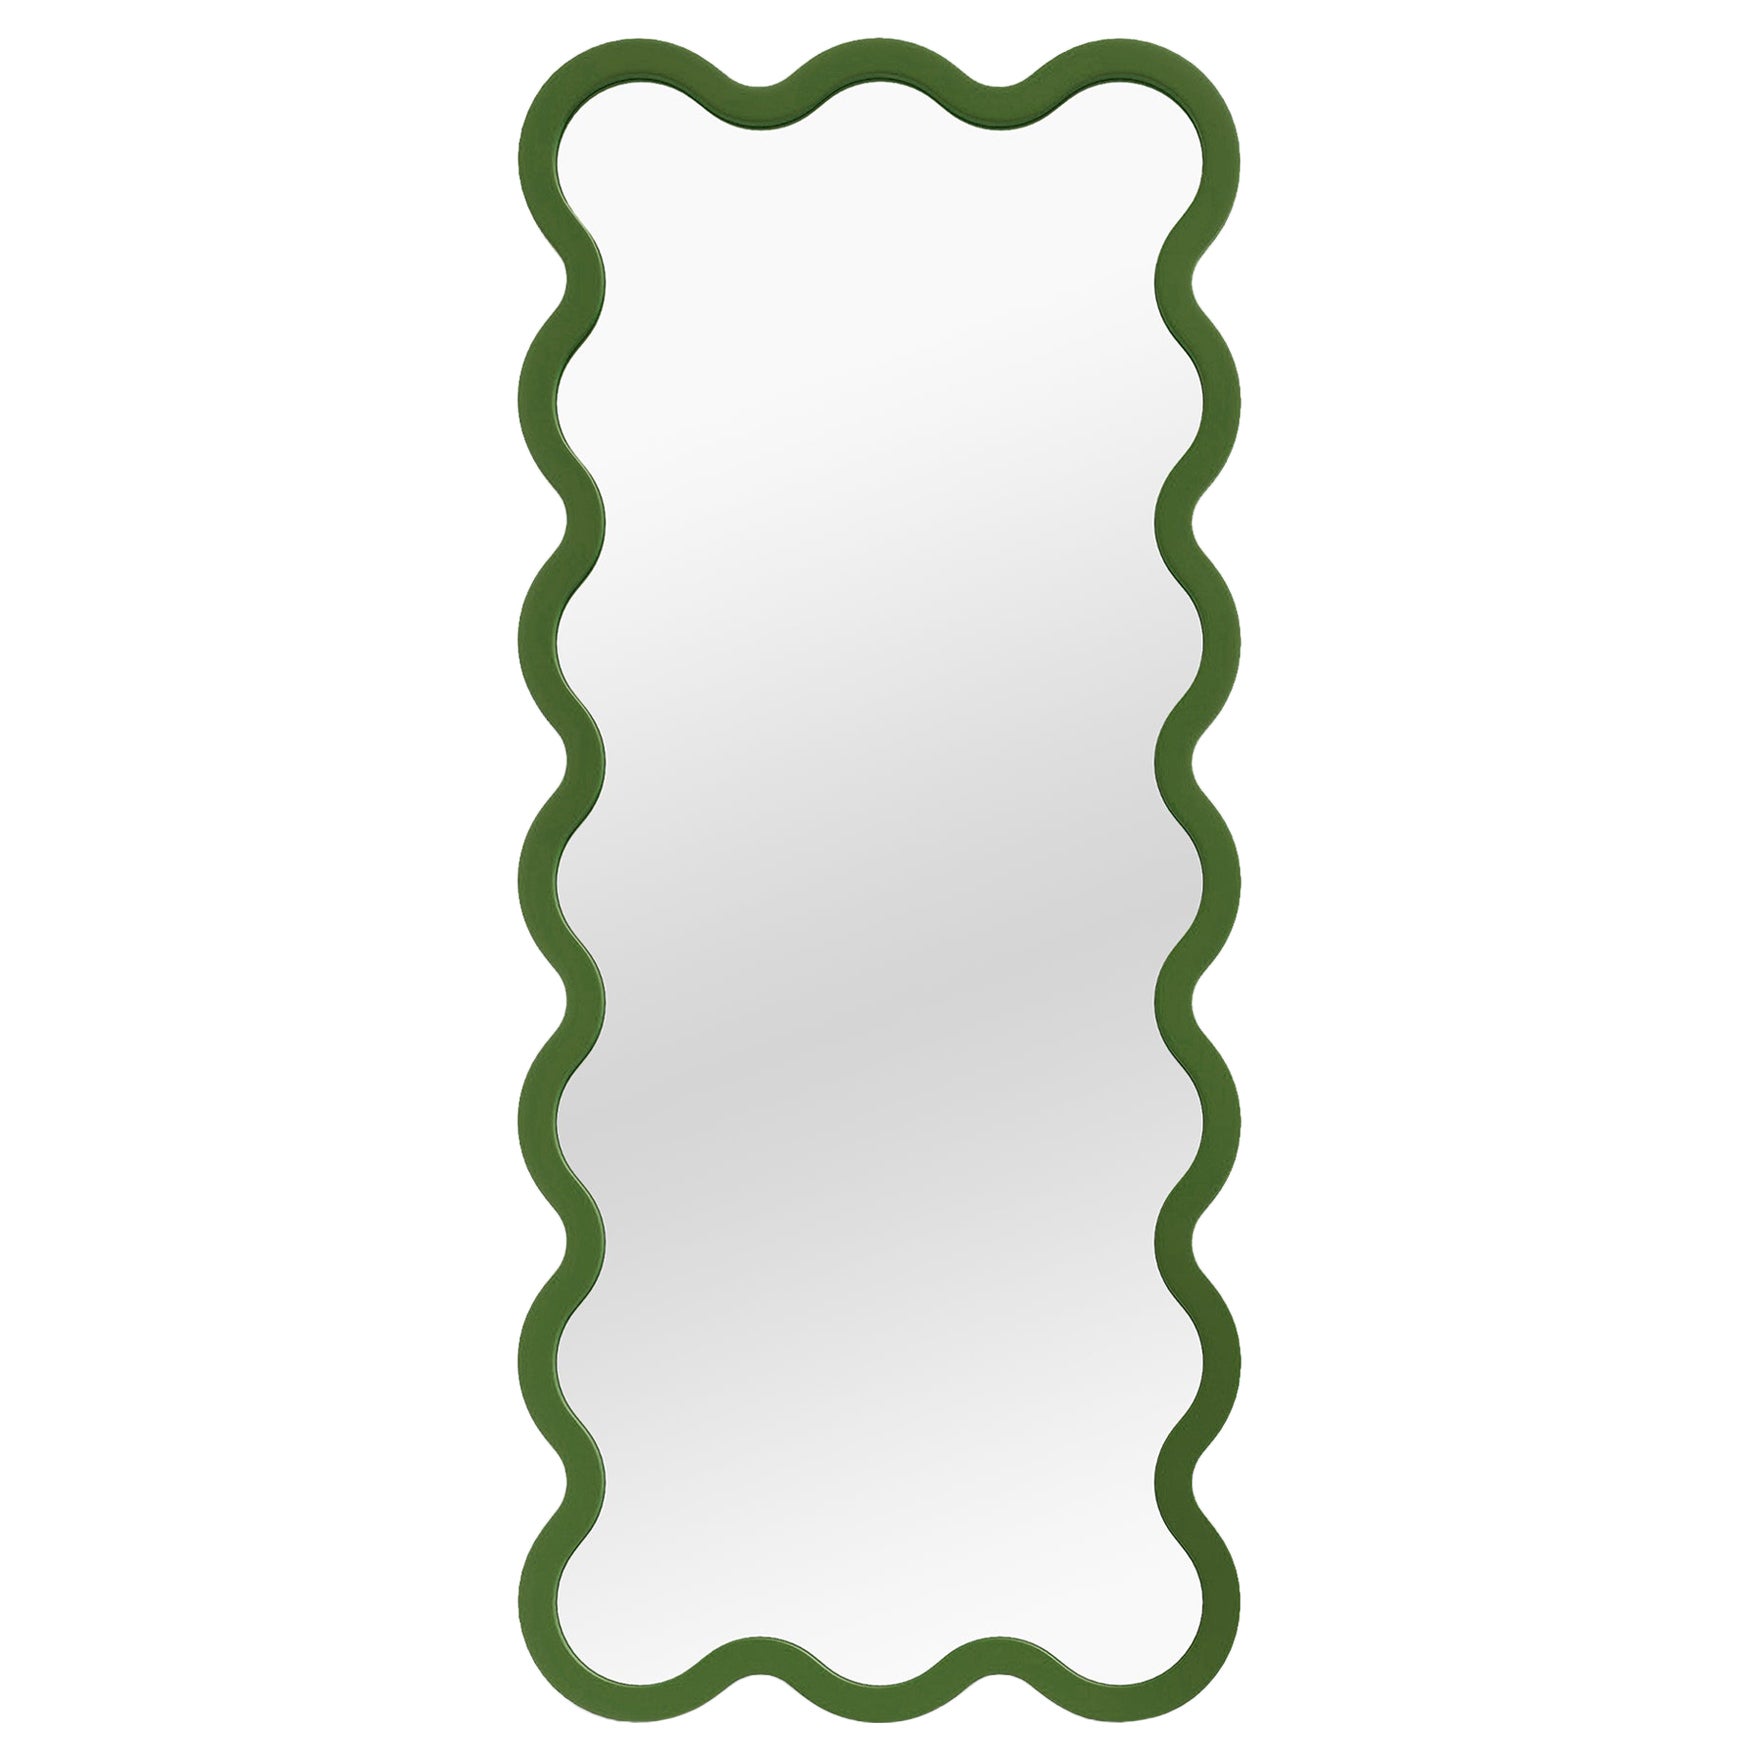 Contemporary Mirror 'Hvyli 16' by Oitoproducts, Green Frame